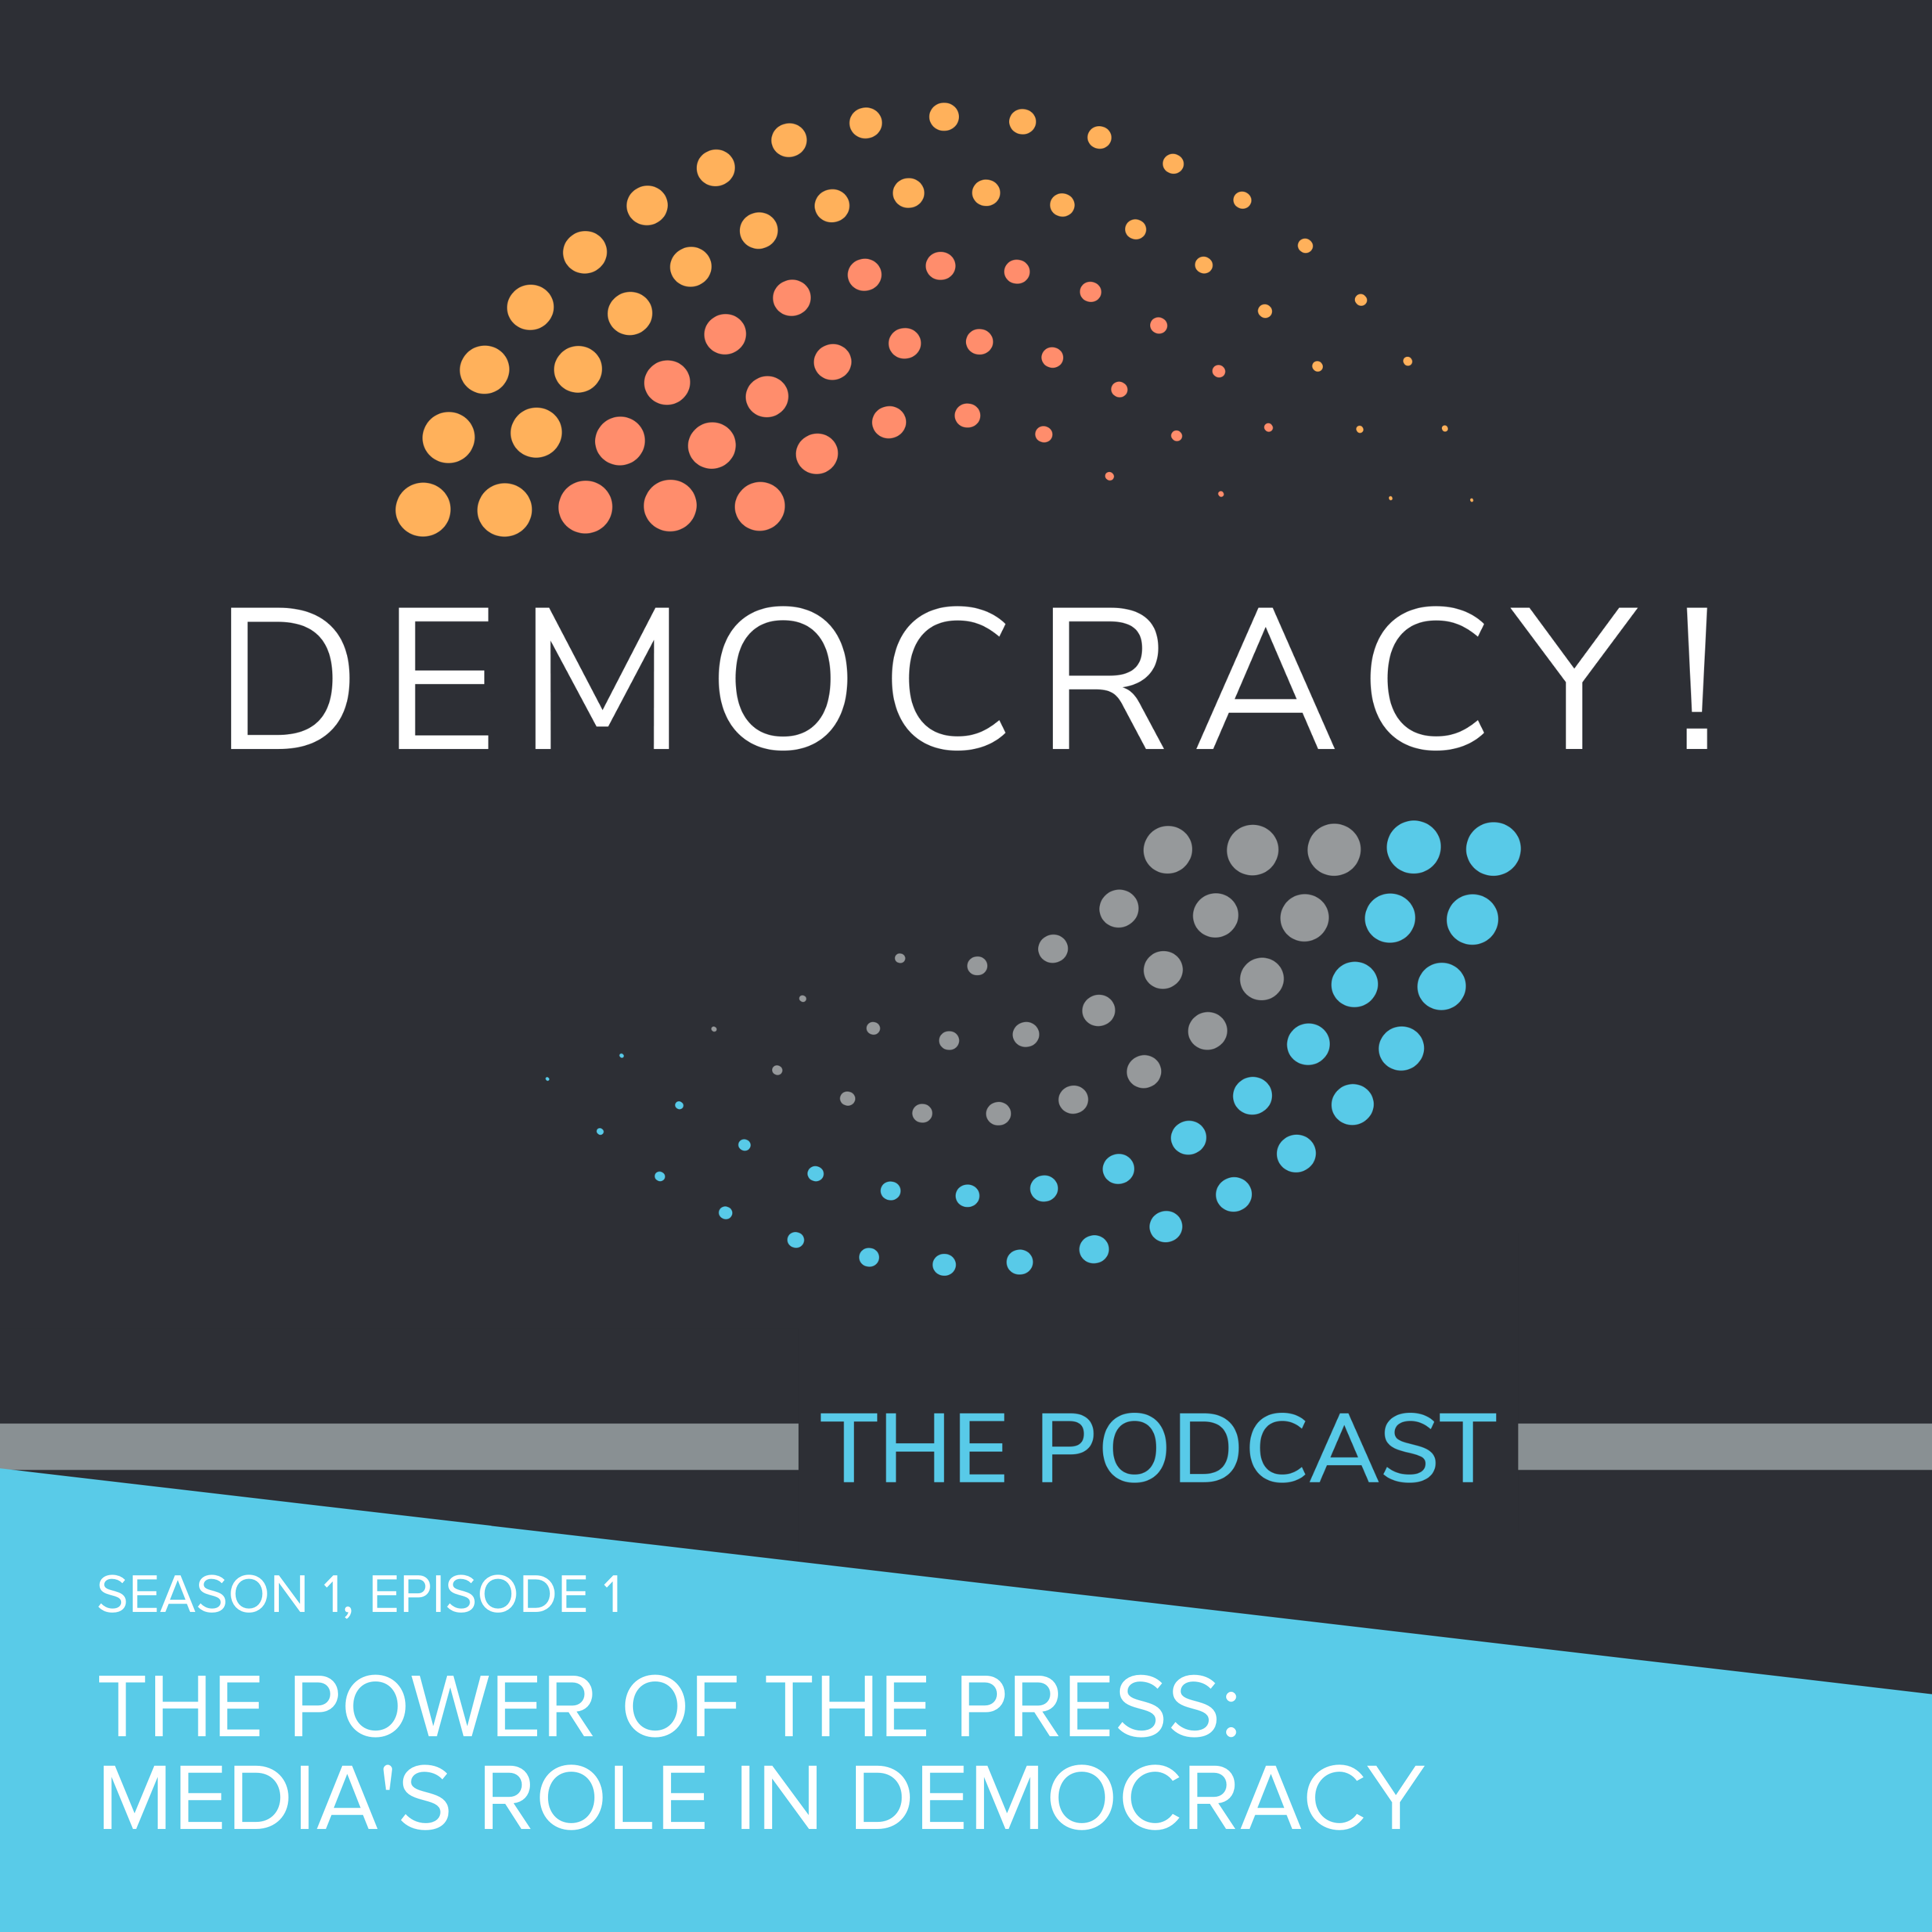 Artwork for podcast Democracy! The Podcast